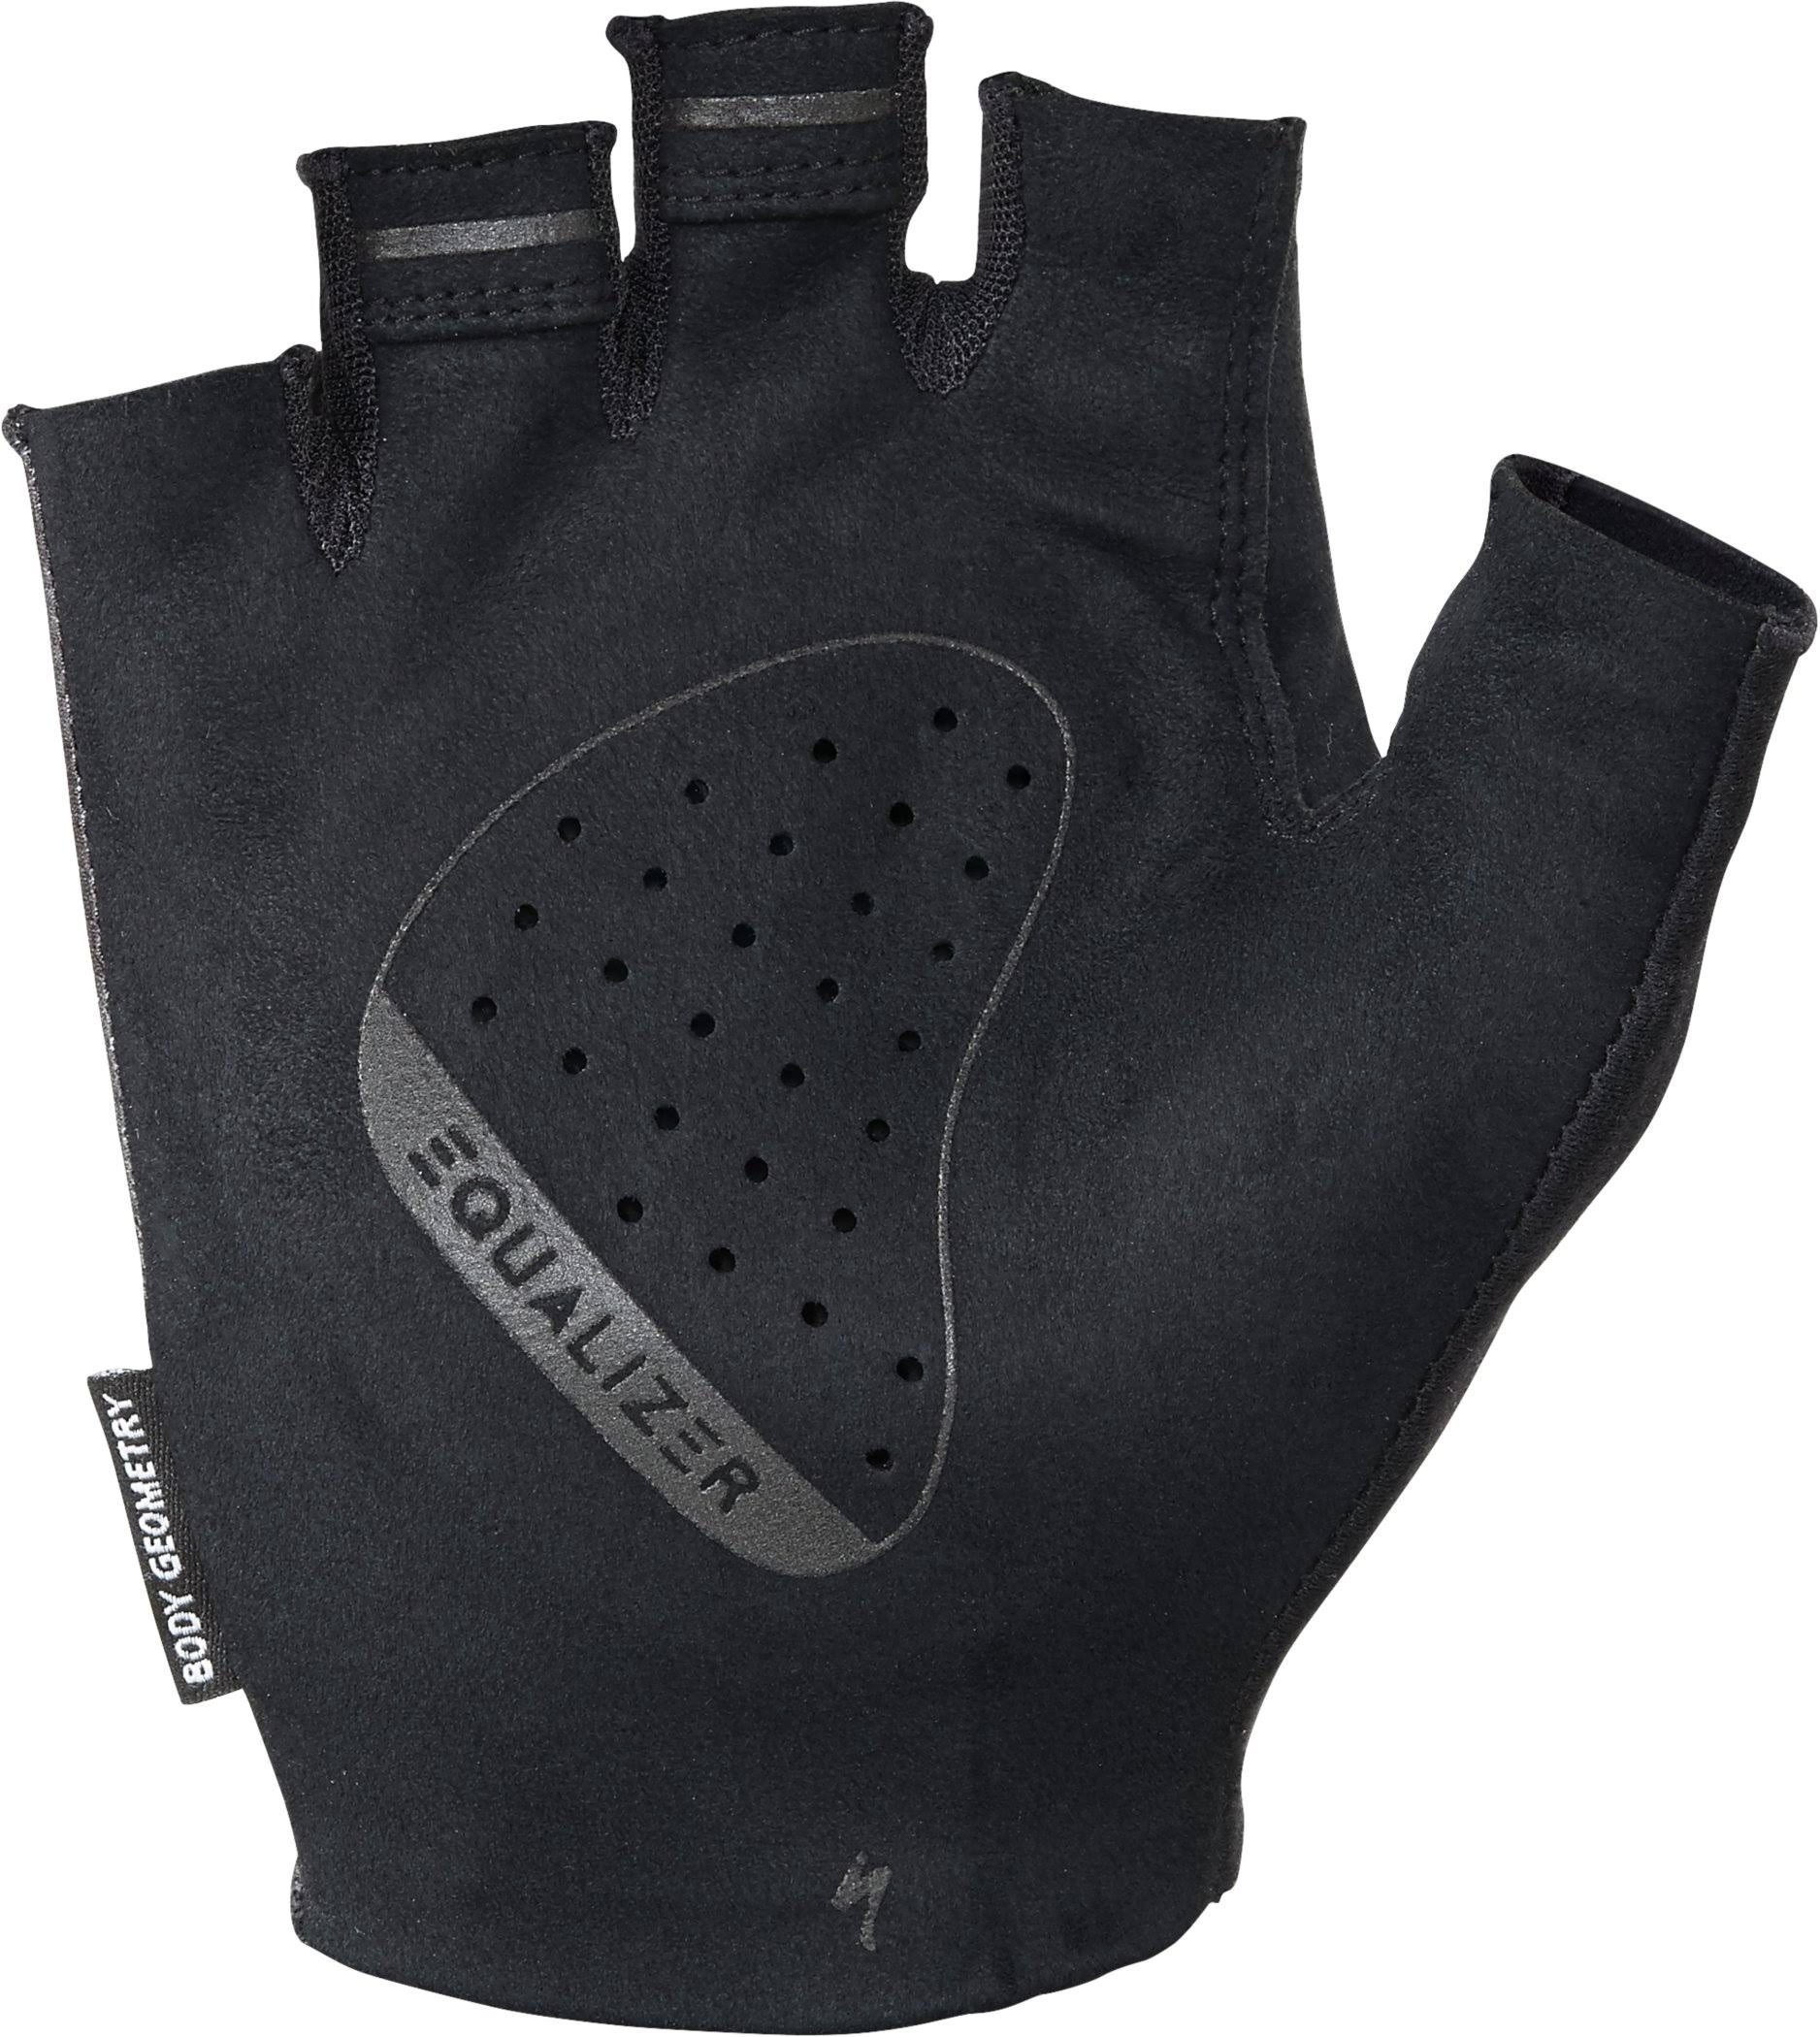 Specialized Grail Gloves